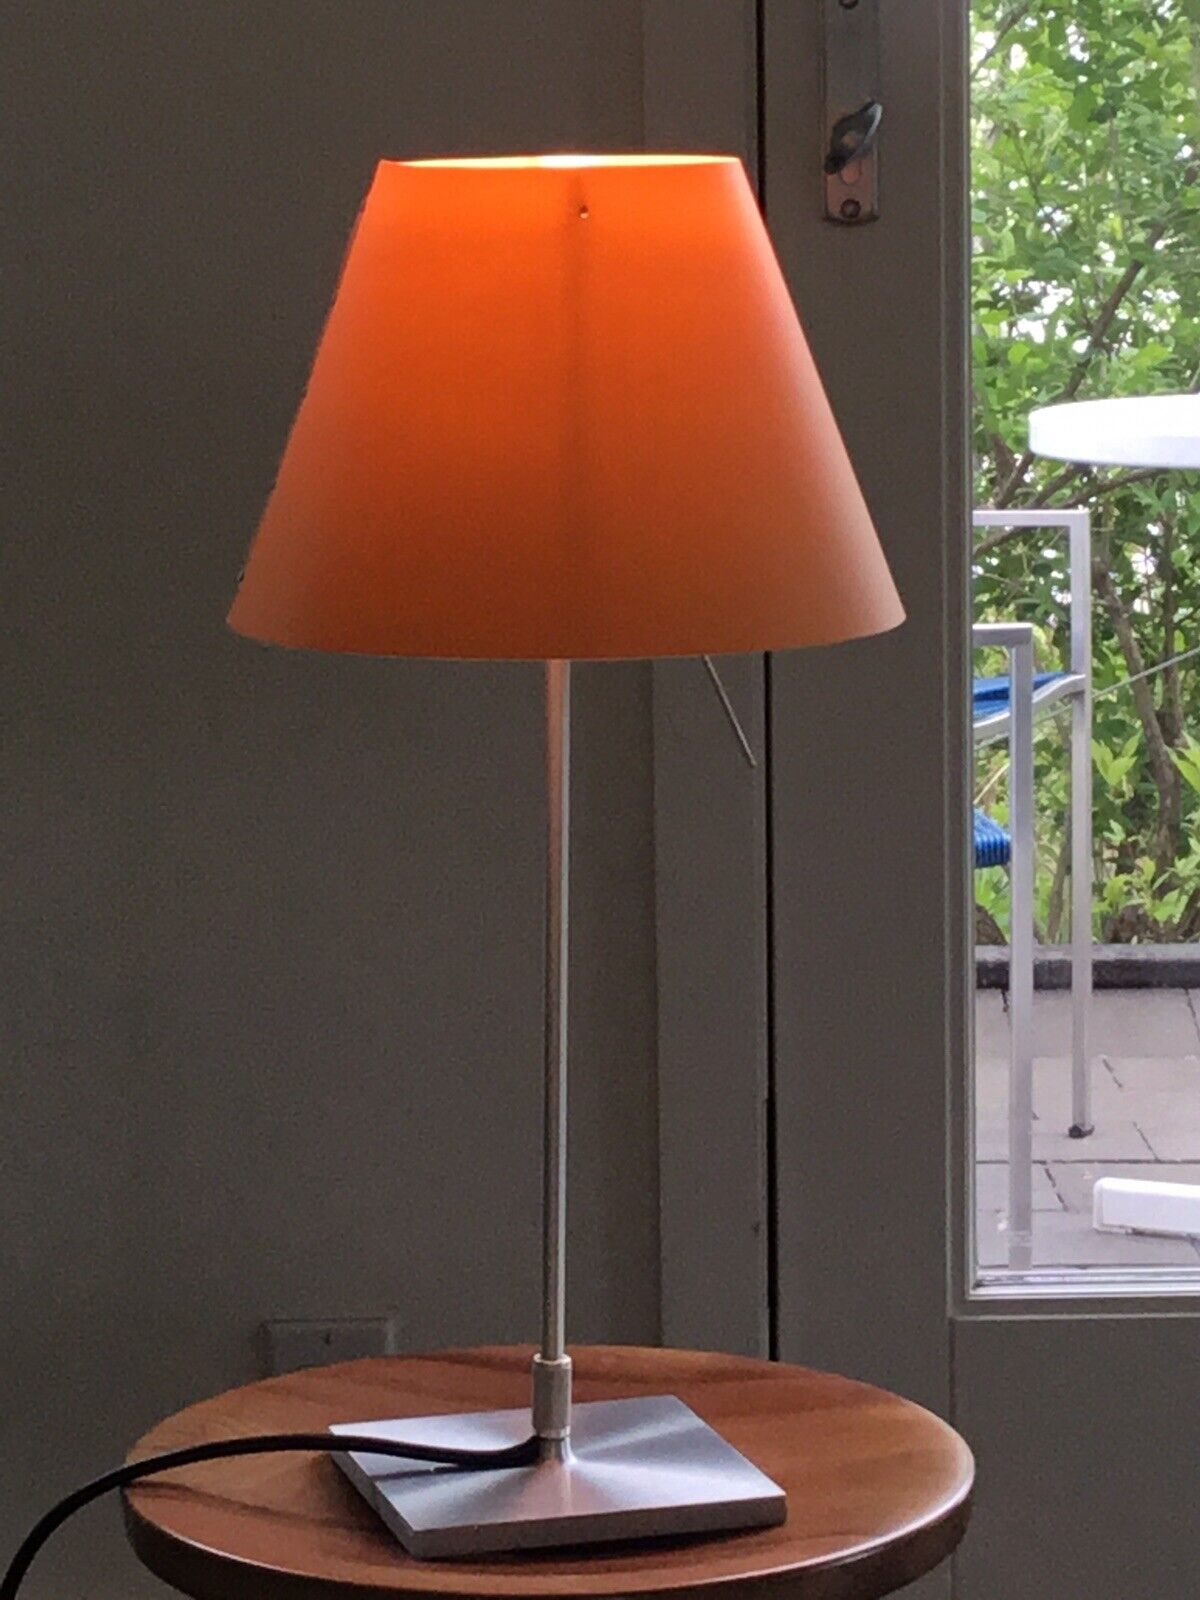 Snazzy schraper Lodge EXCELLENT! Luceplan Costanzina Table Lamp By Paolo Rizzatto Made In Italy |  eBay